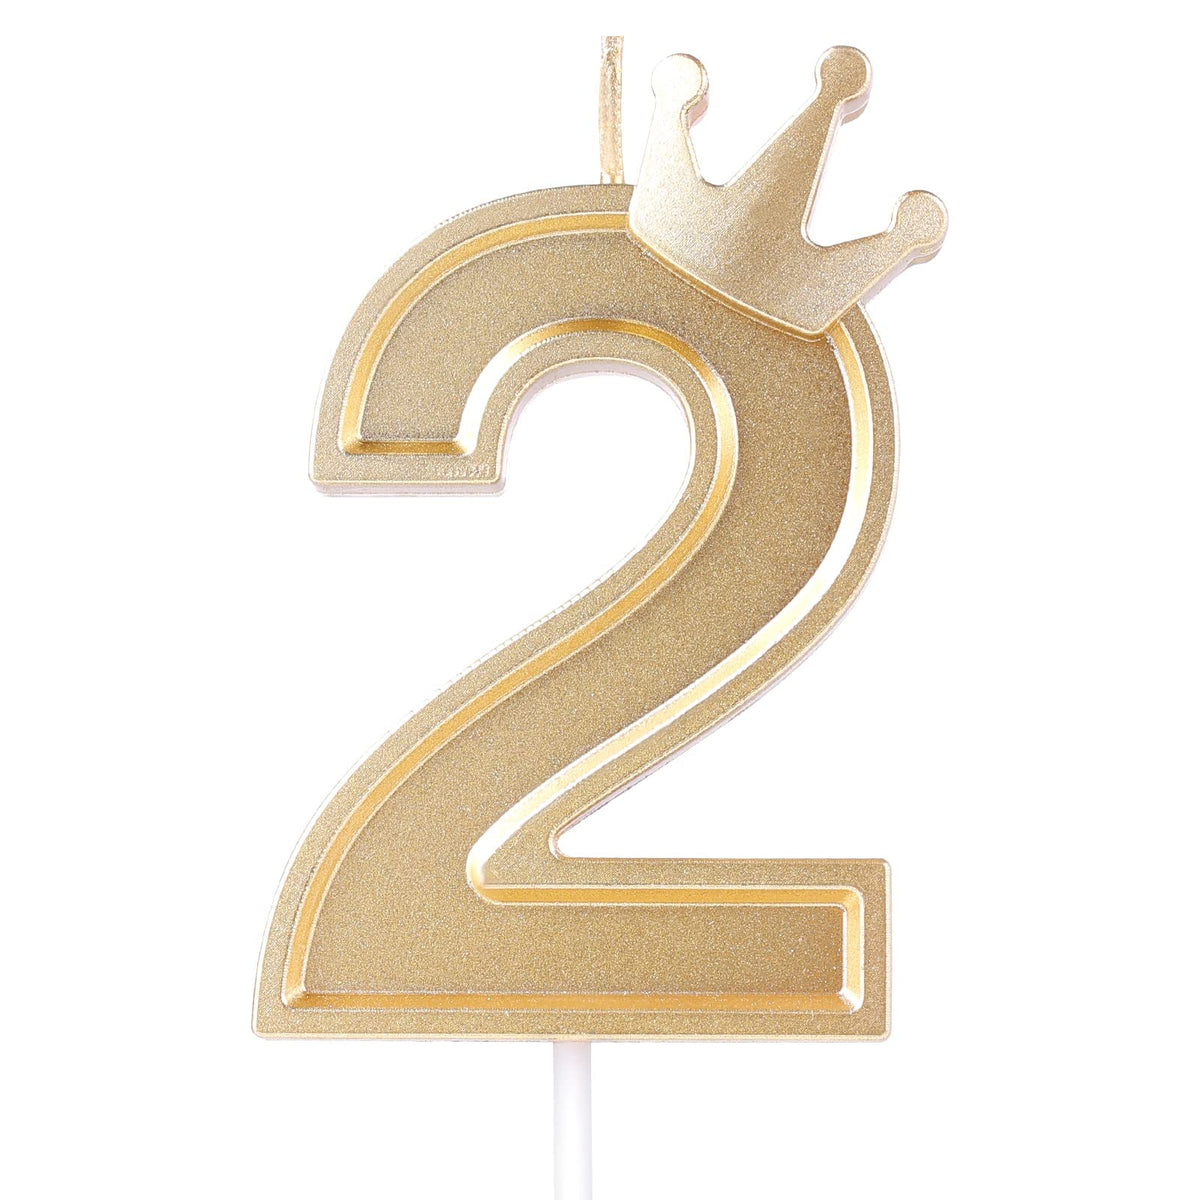 AIEX 3inch Birthday Number Candle, 3D Candle Cake Topper with Crown Cake Numeral Candles Number Candles for Birthday Anniversary Parties (Gold; 2)